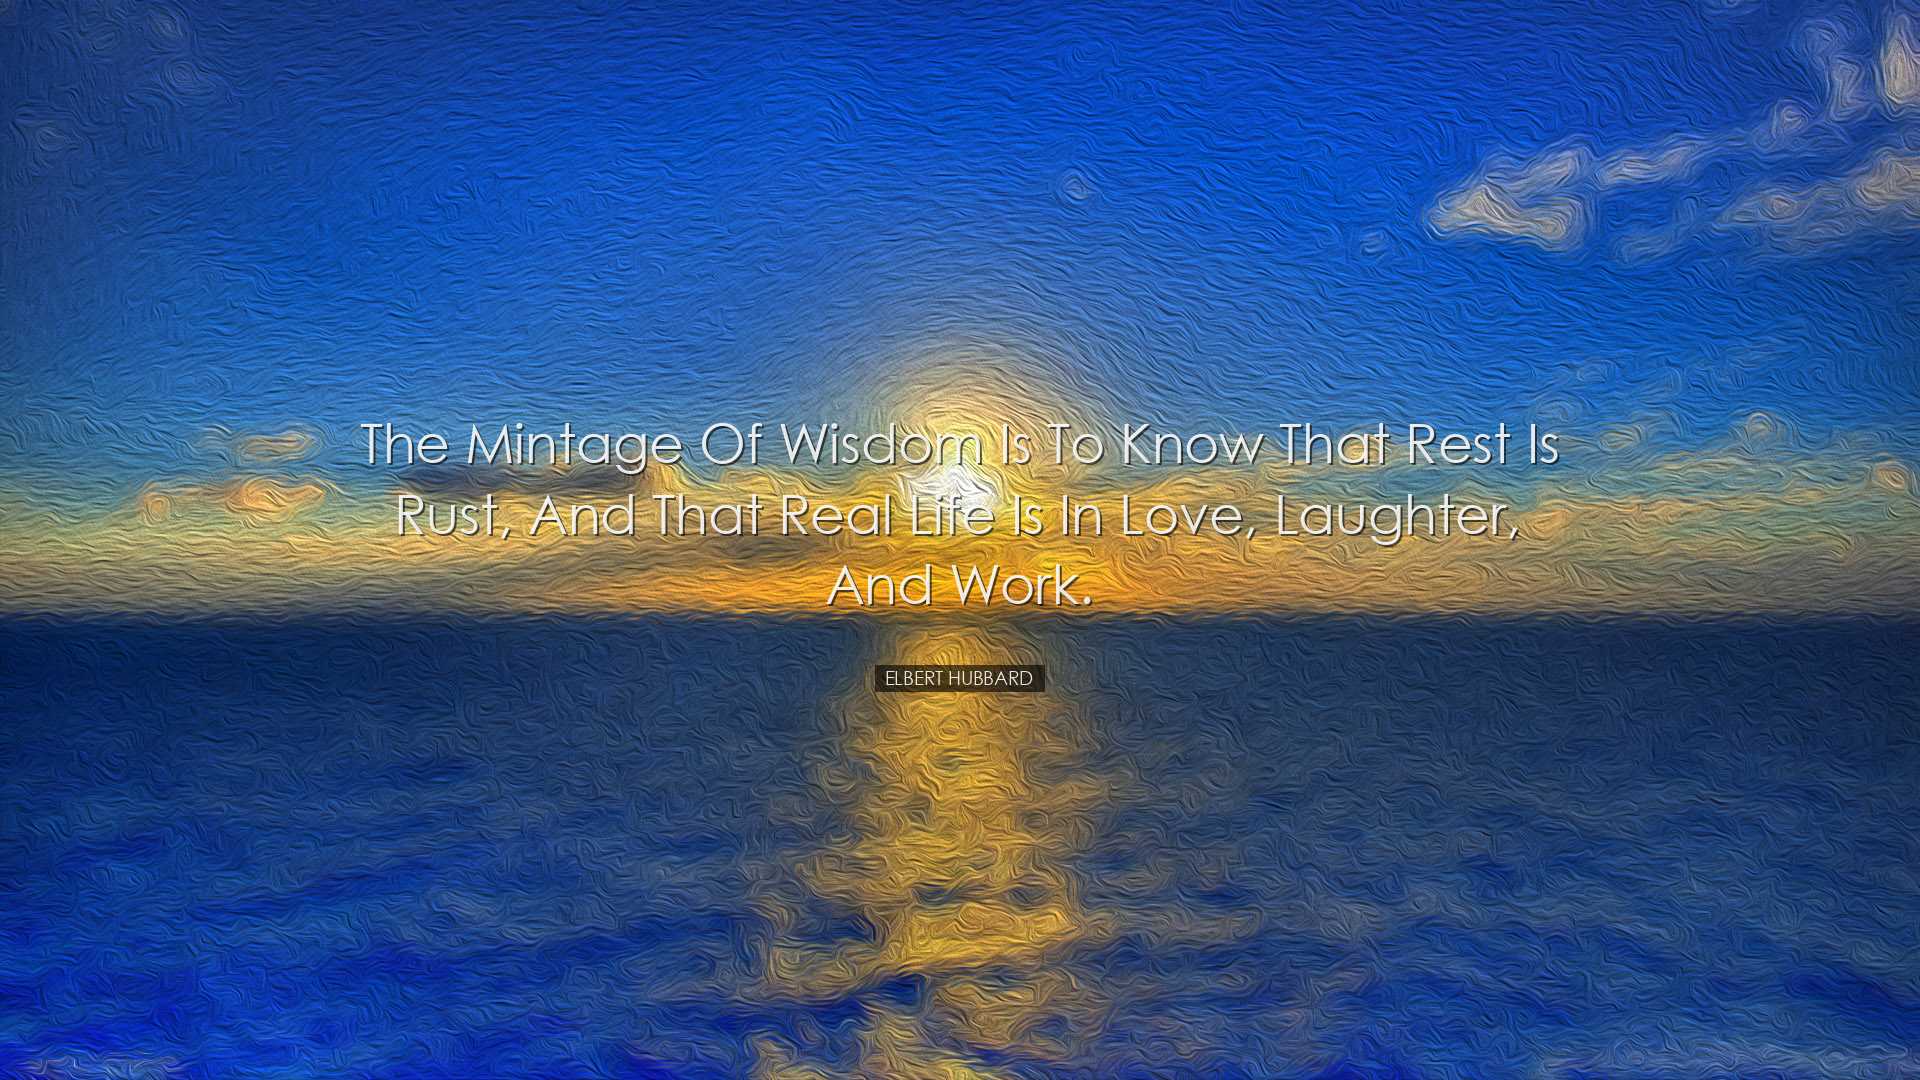 The mintage of wisdom is to know that rest is rust, and that real